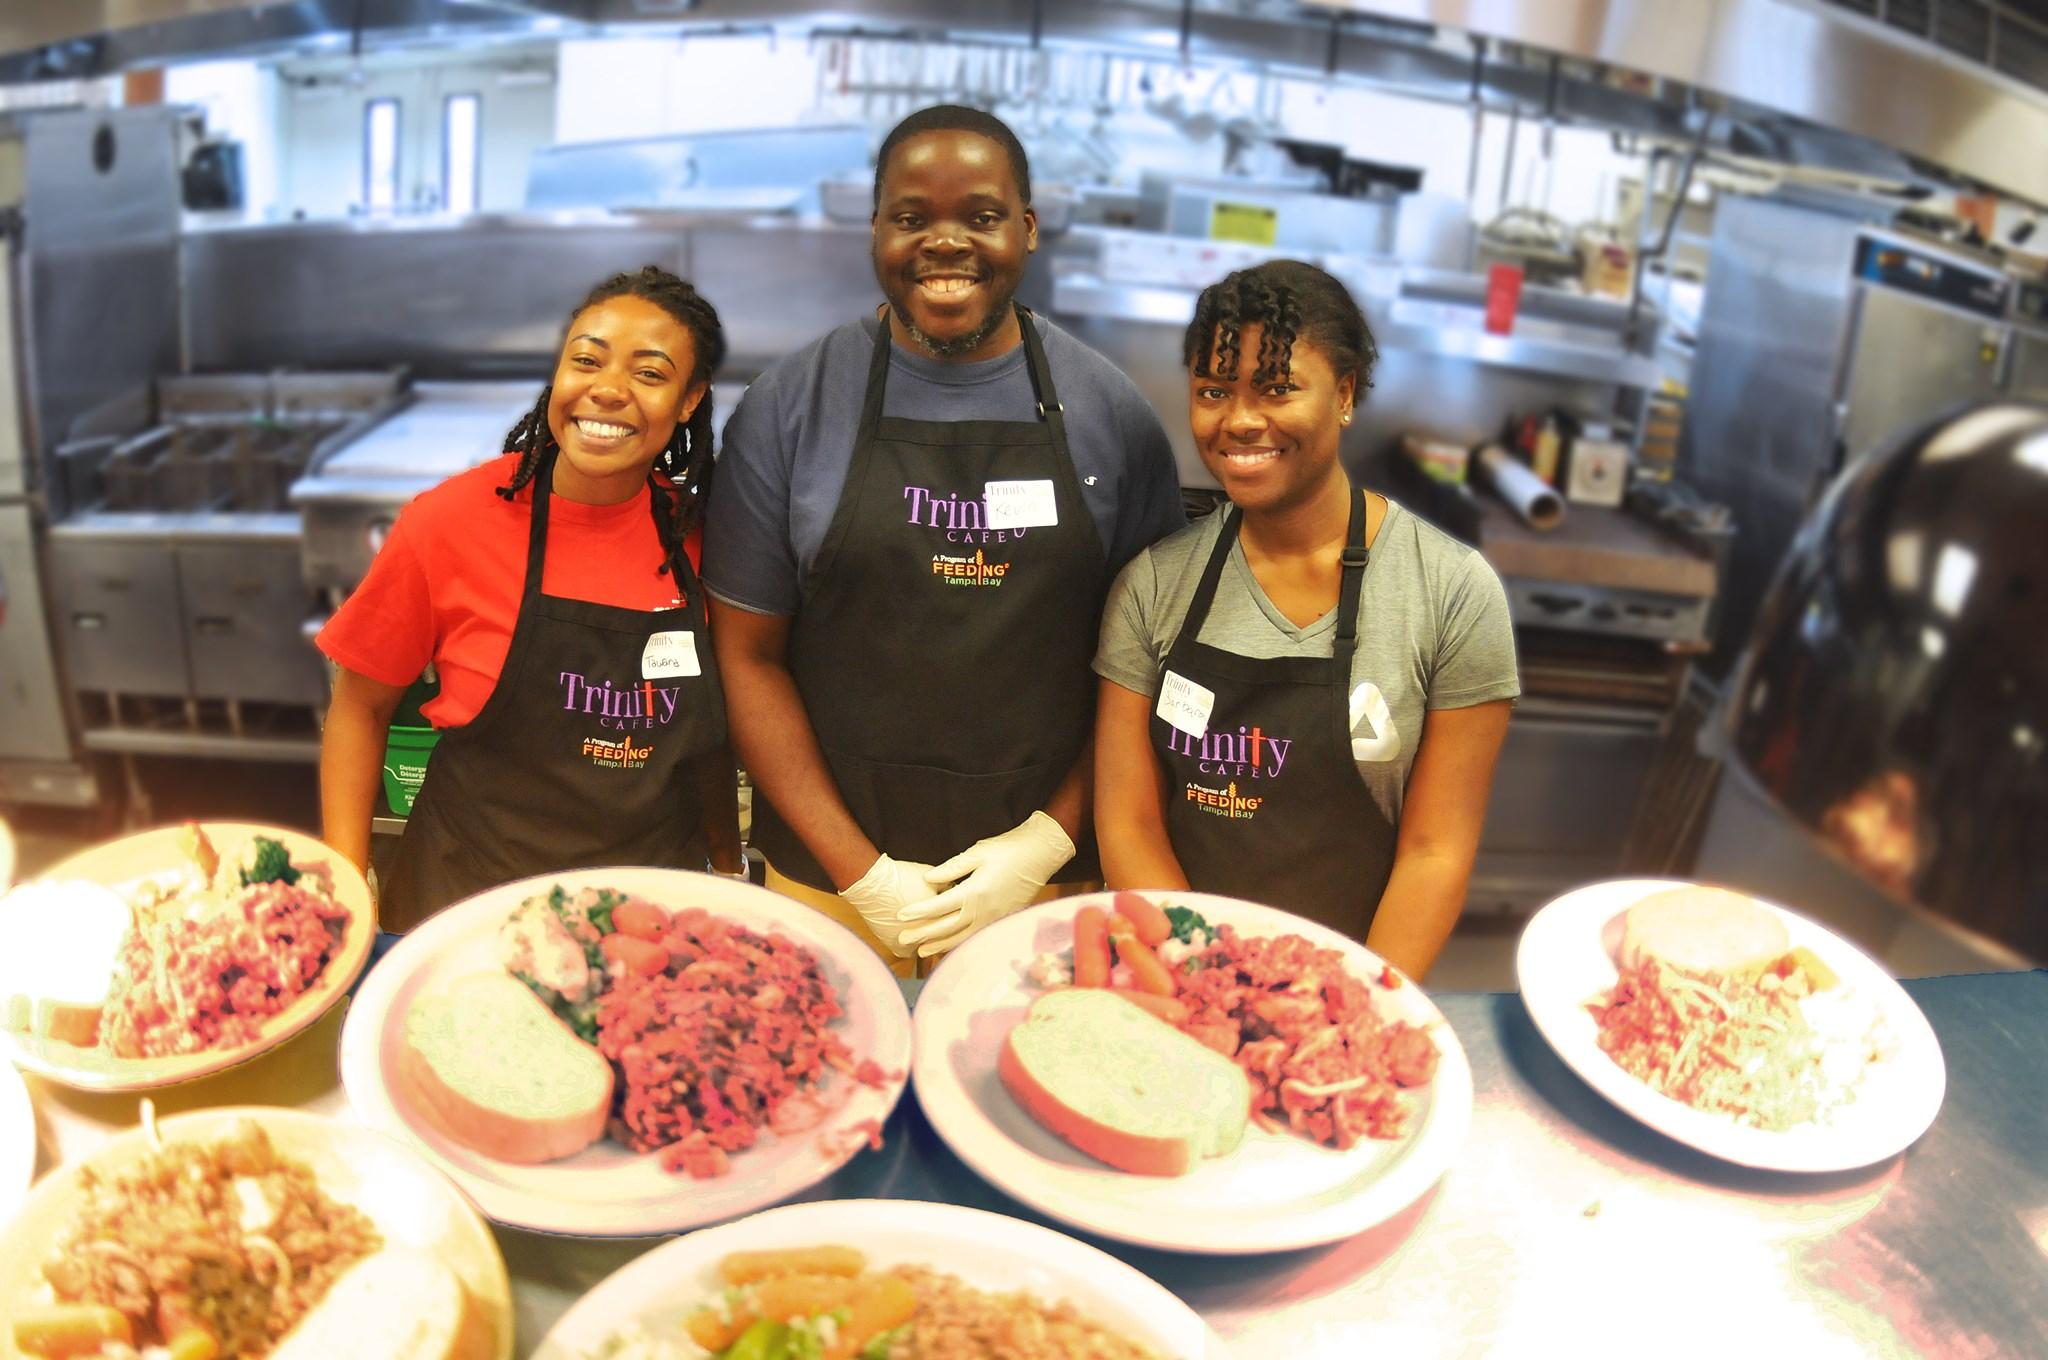 Volunteer with Project Helping to Feed the Hungry and the Homeless (Trinity Cafe)